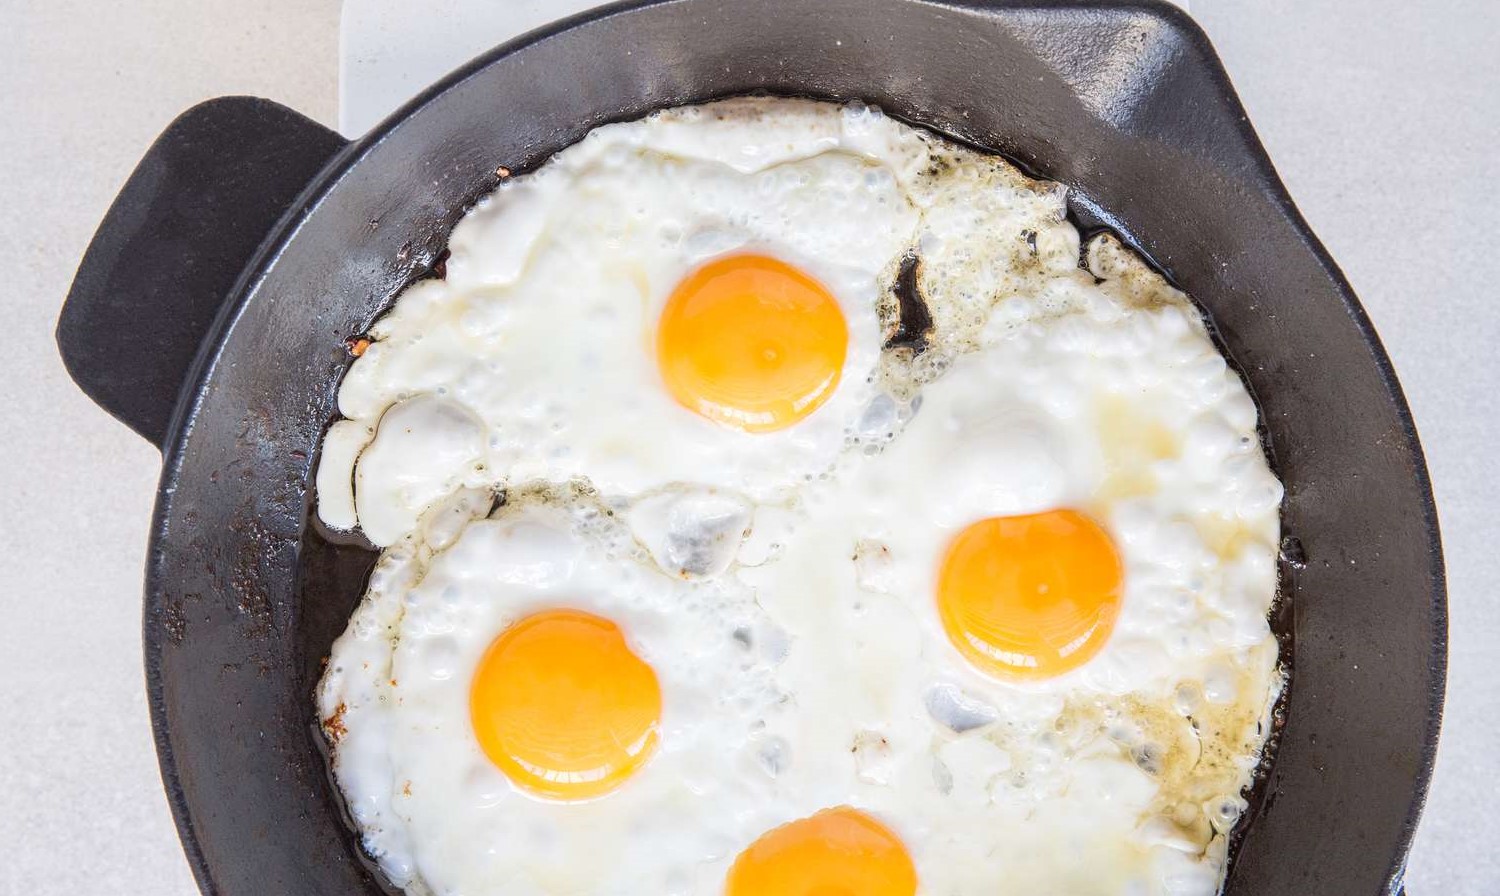 https://storables.com/wp-content/uploads/2023/07/how-to-cook-eggs-on-an-electric-skillet-1690260016.jpg